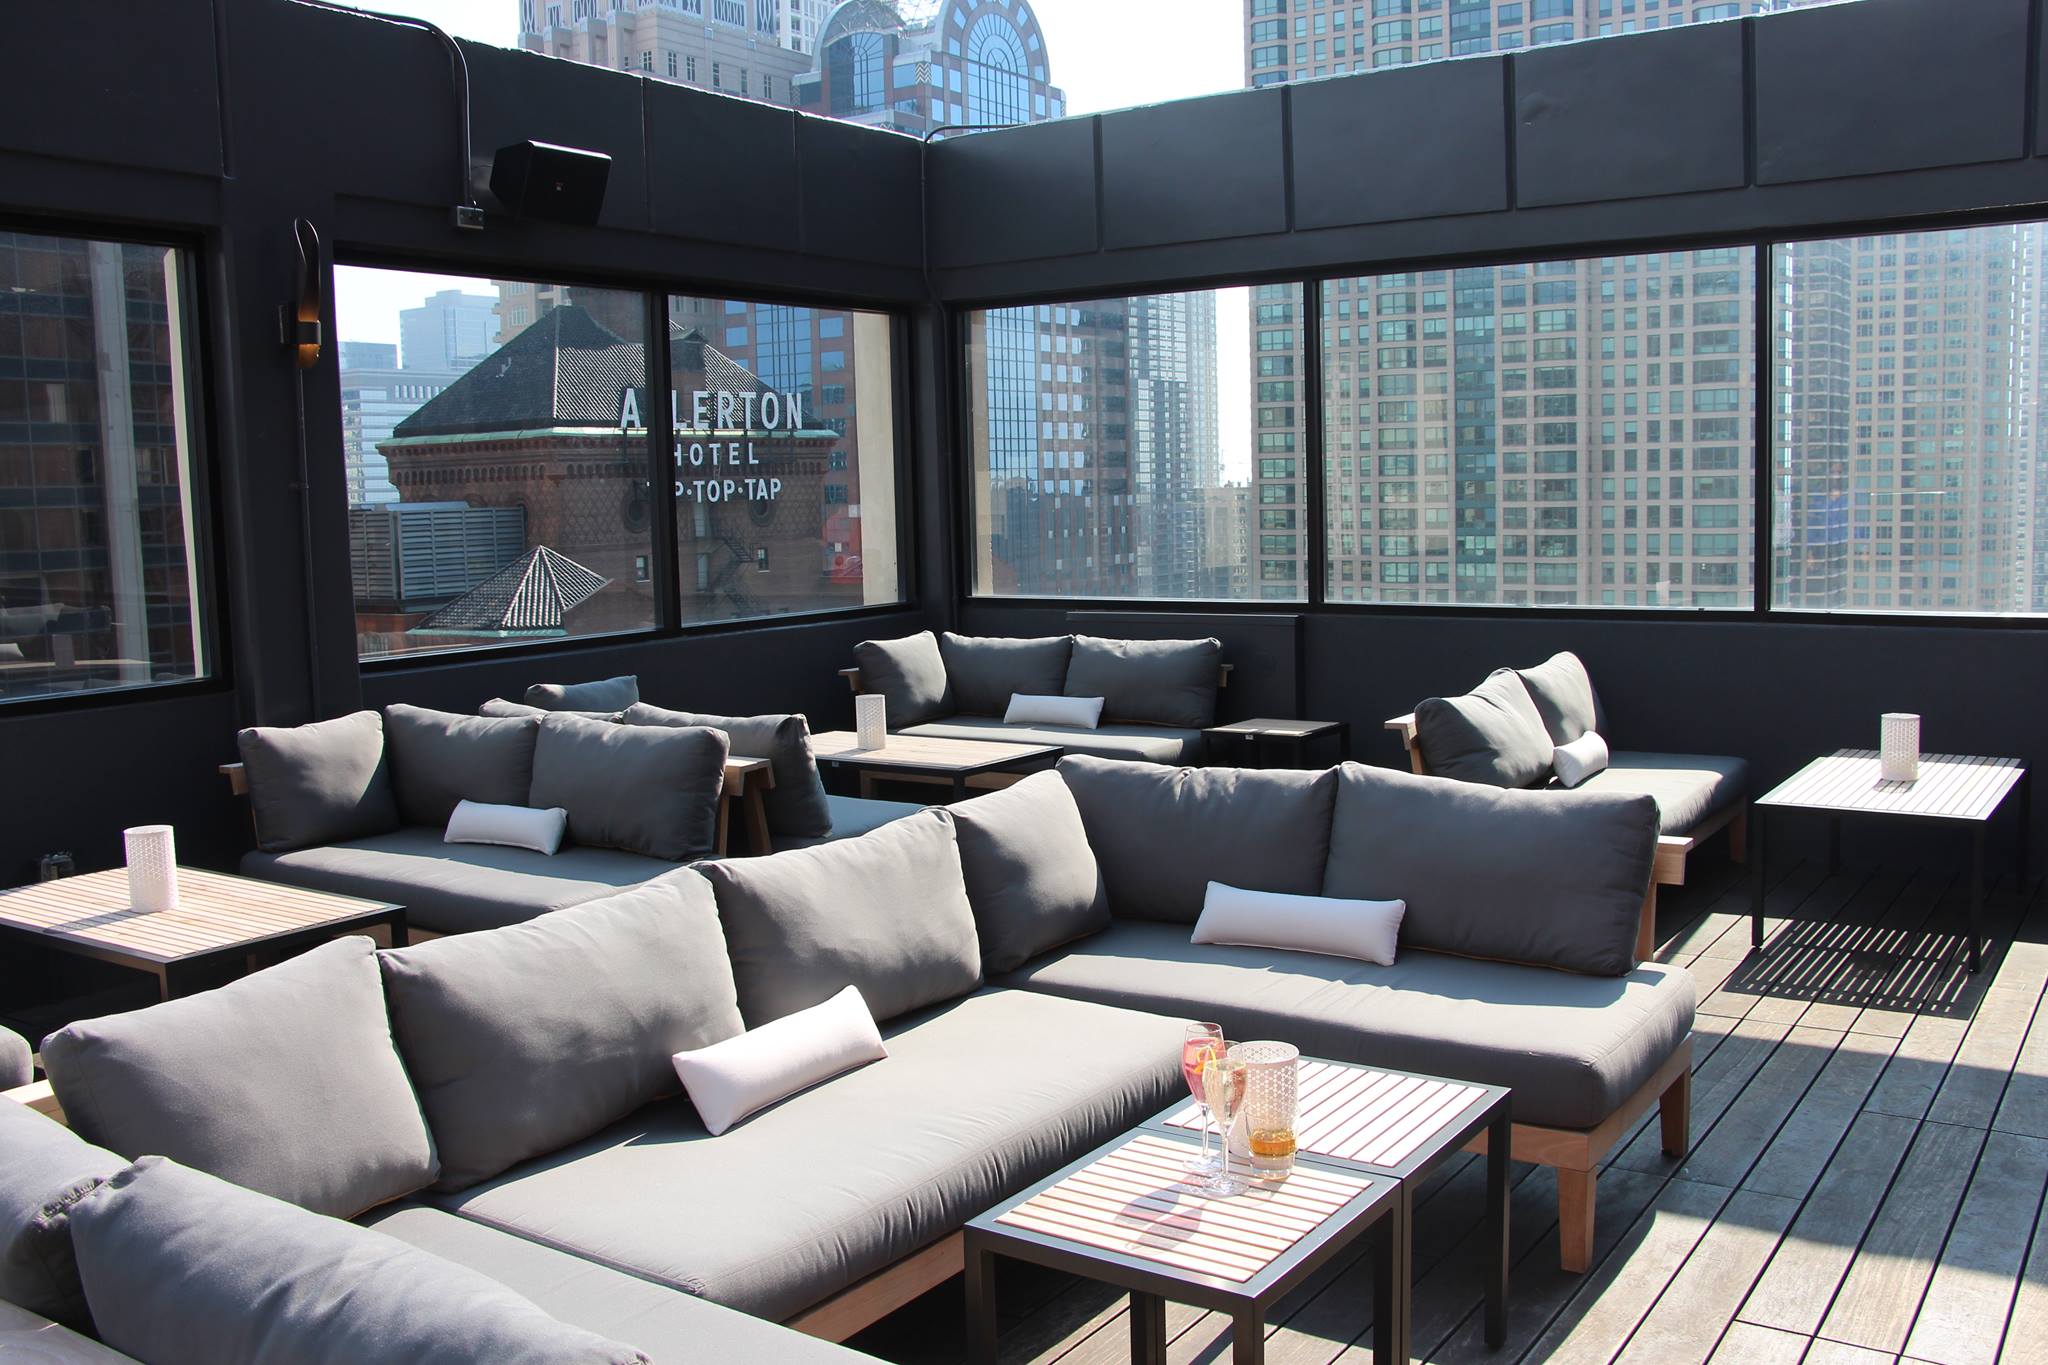 52eighty - chicago rooftop bar